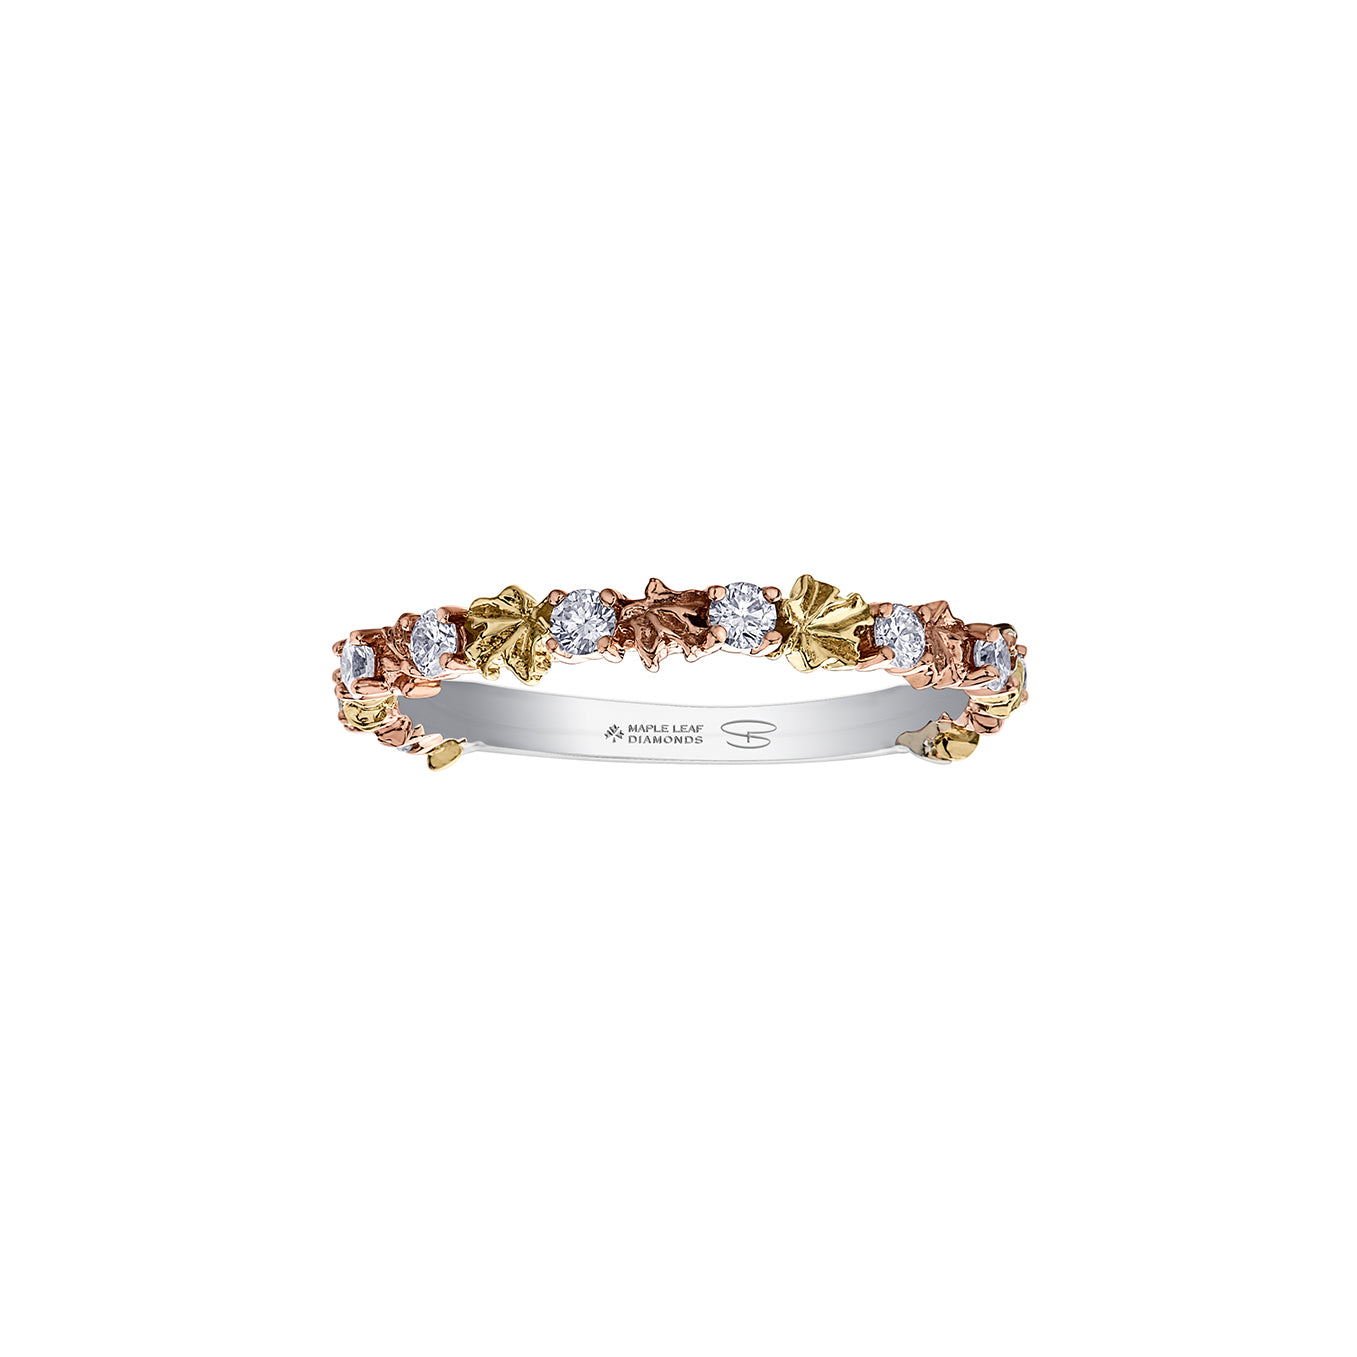 Crafted in 14KT Certified Canadian Gold, this ring features tricolour maple leafs alternating with round brilliant-cut Canadian diamonds.